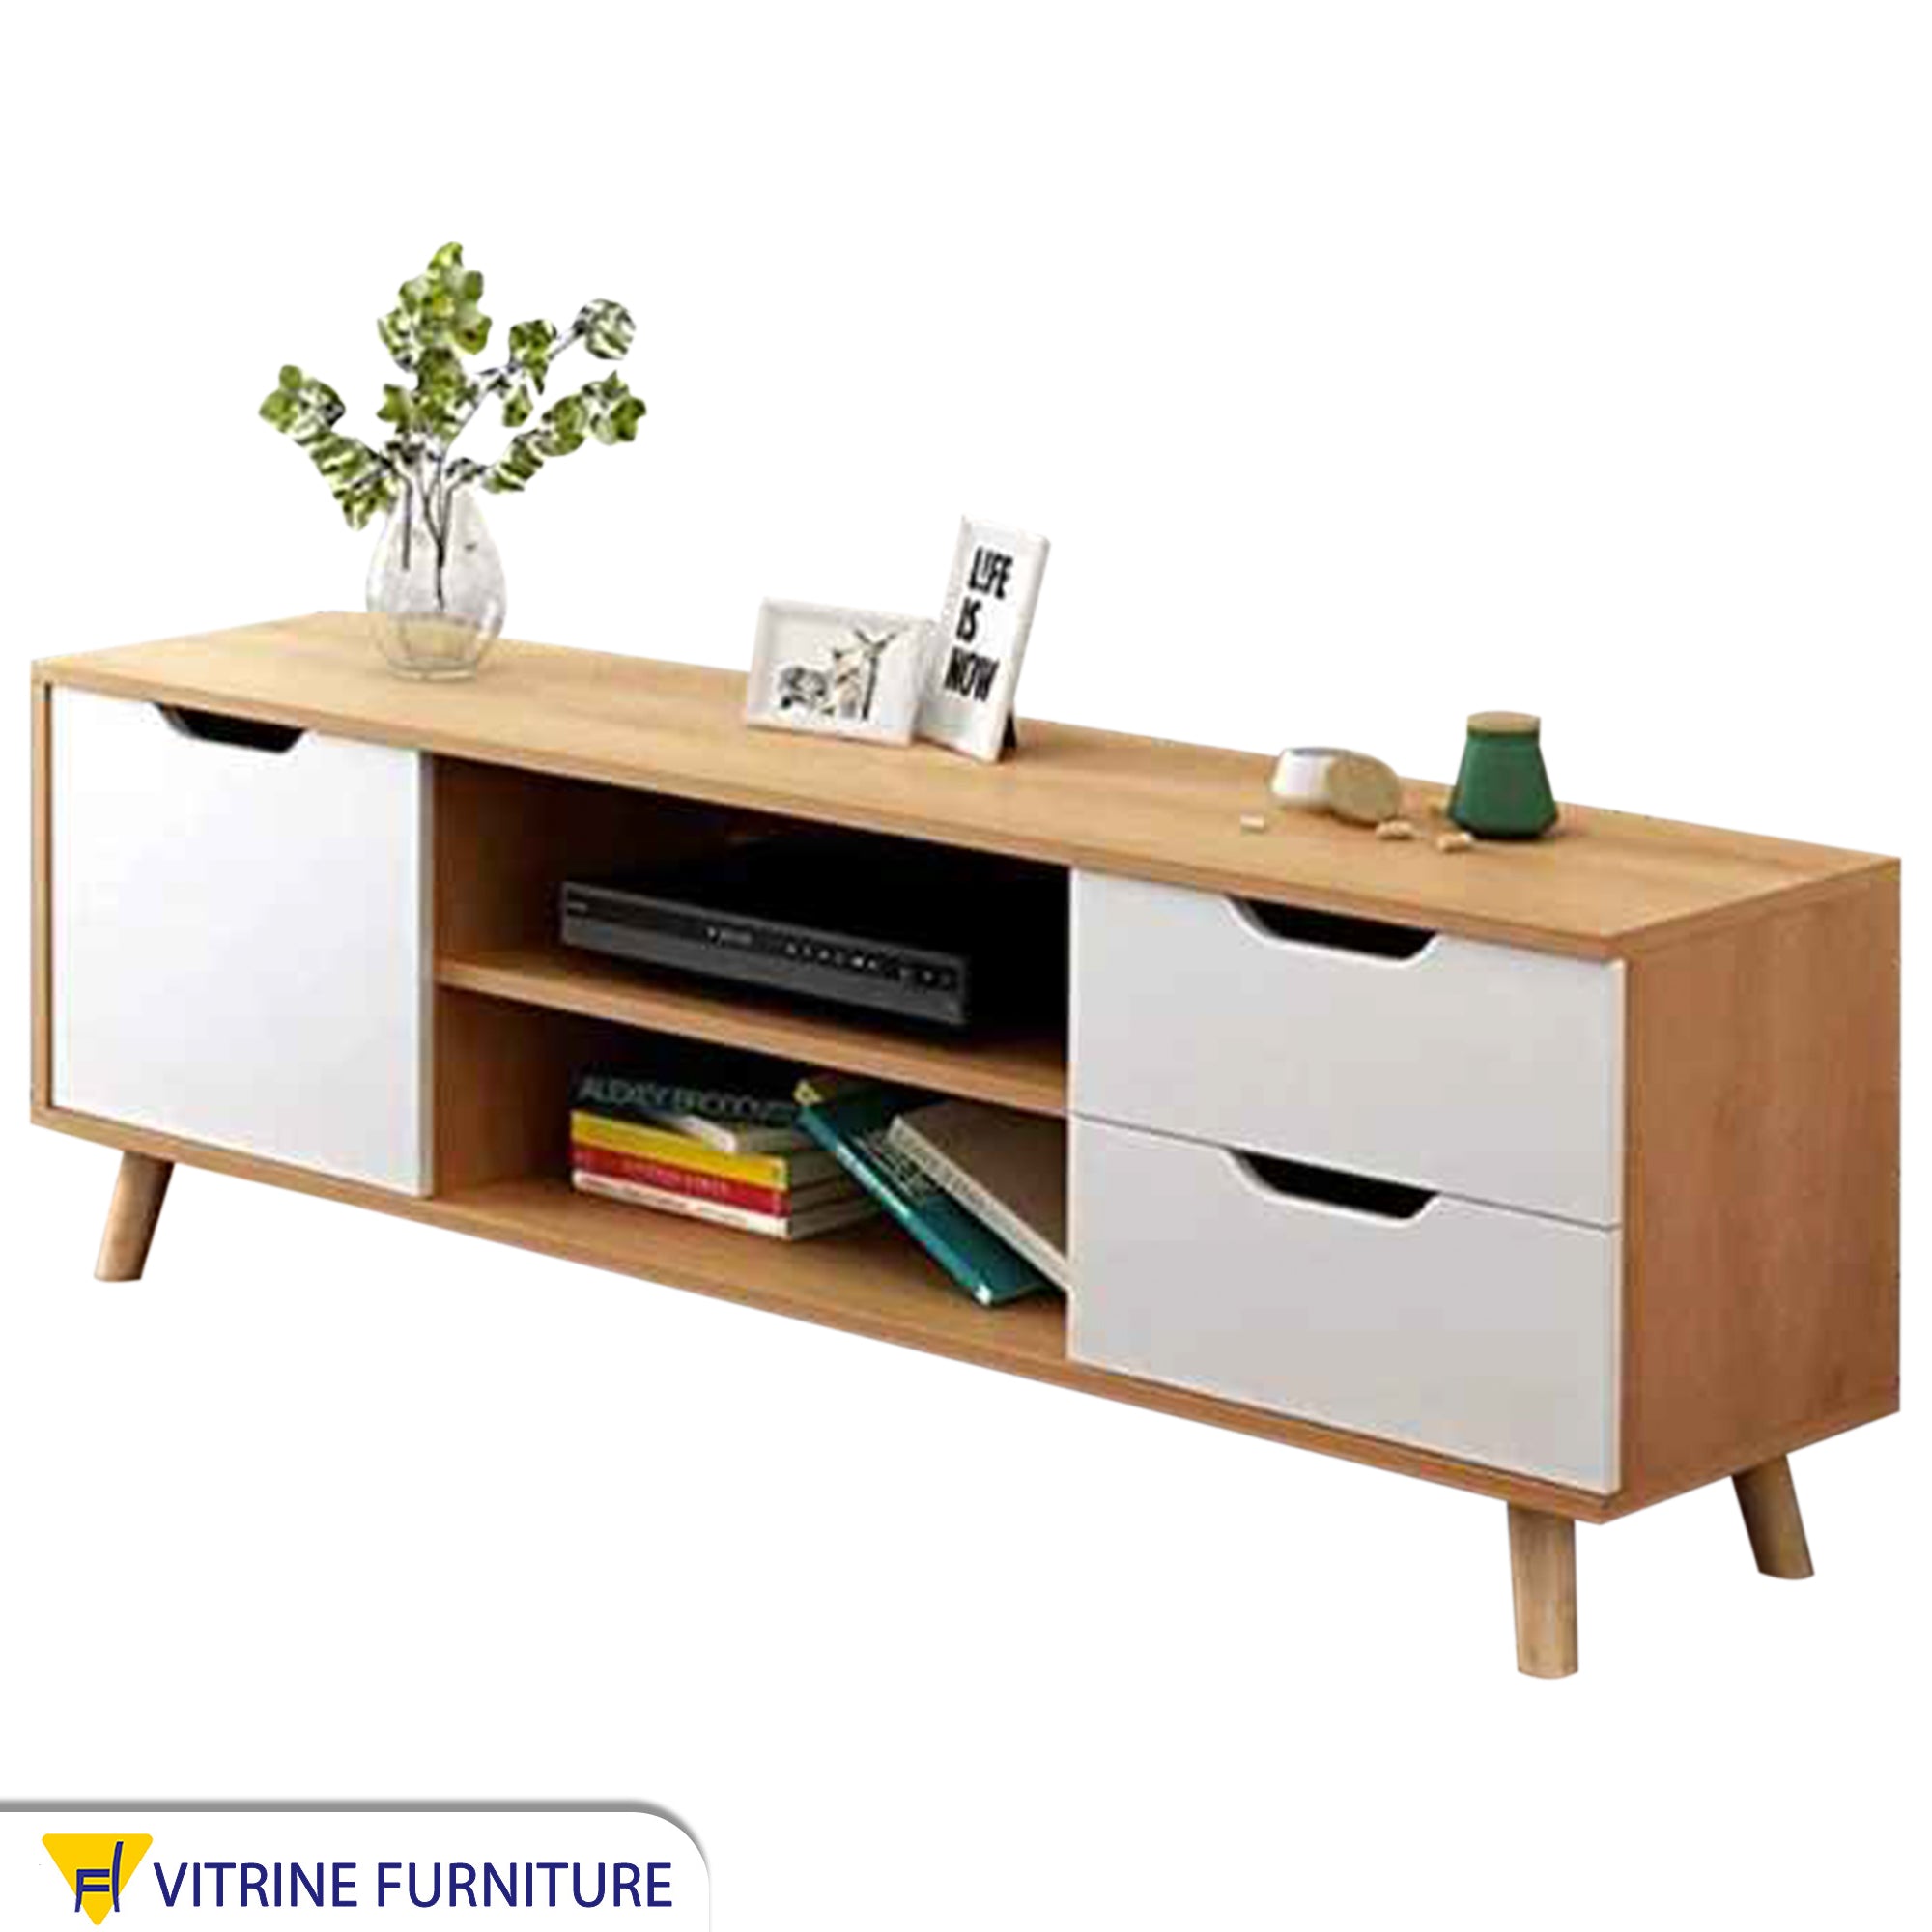 A TV unit with two drawers, a flip drawers , and a middle shelf